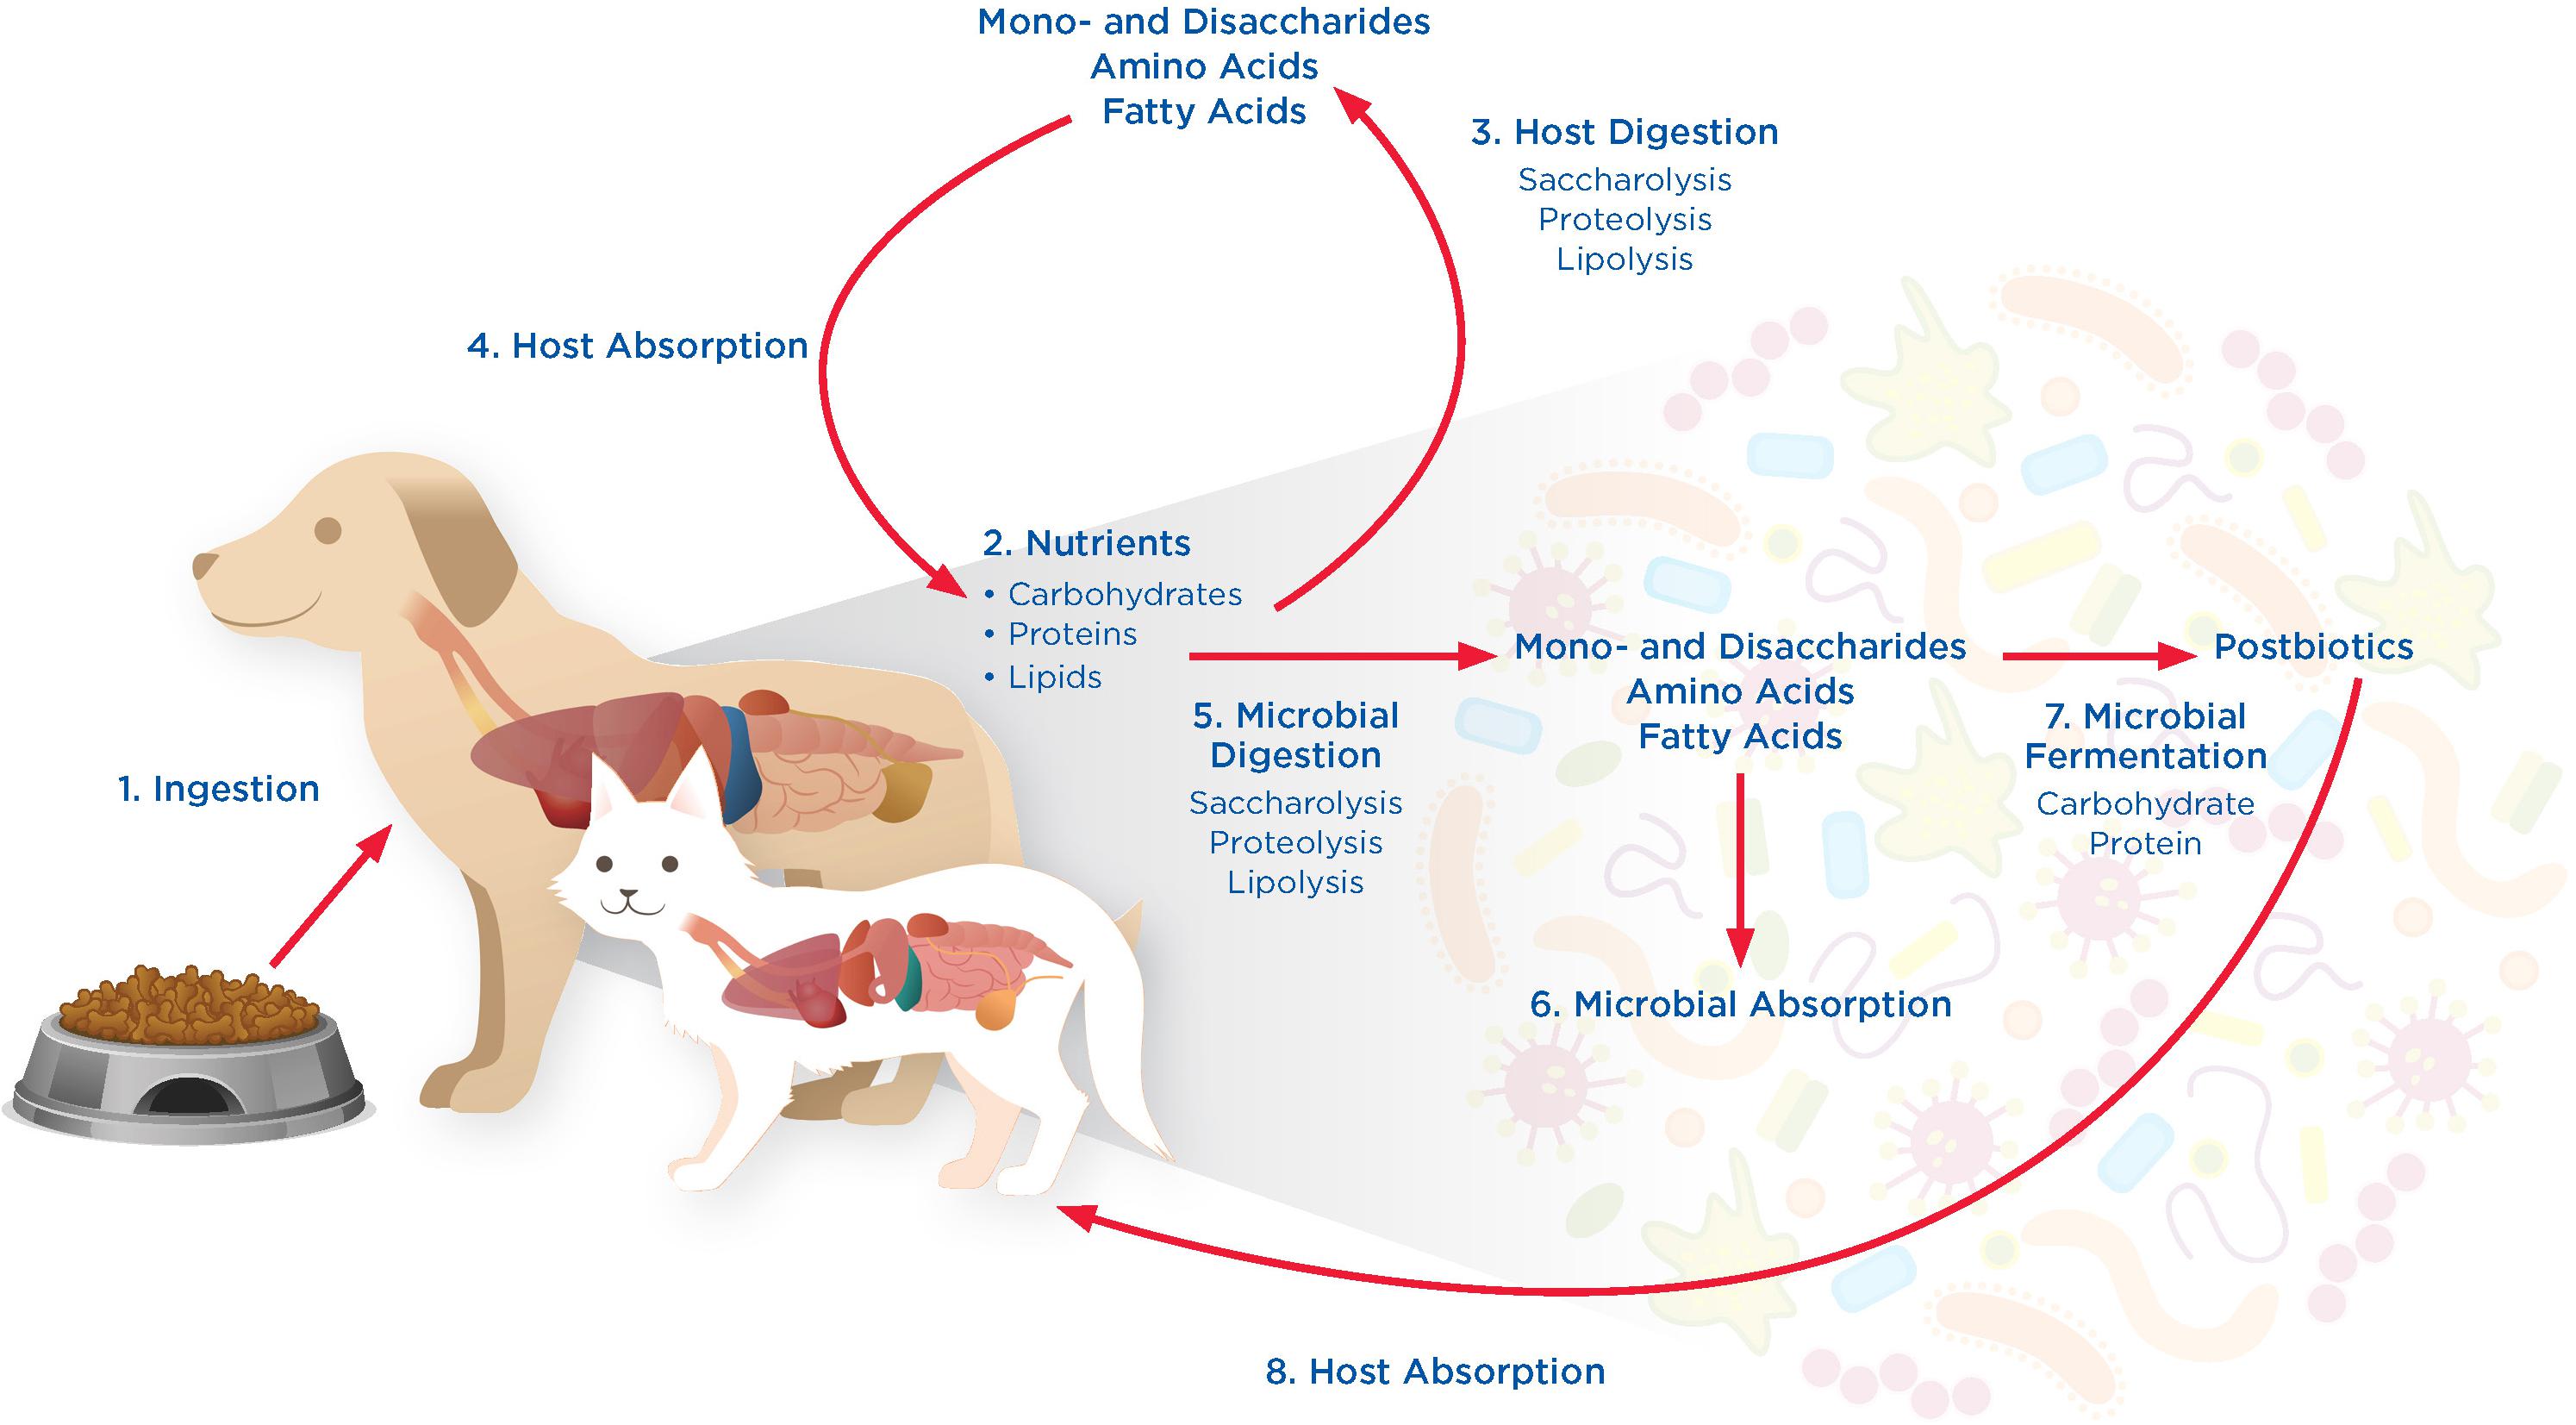 Nutrient absorption processes in animals and their gastrointestinal microbiomes